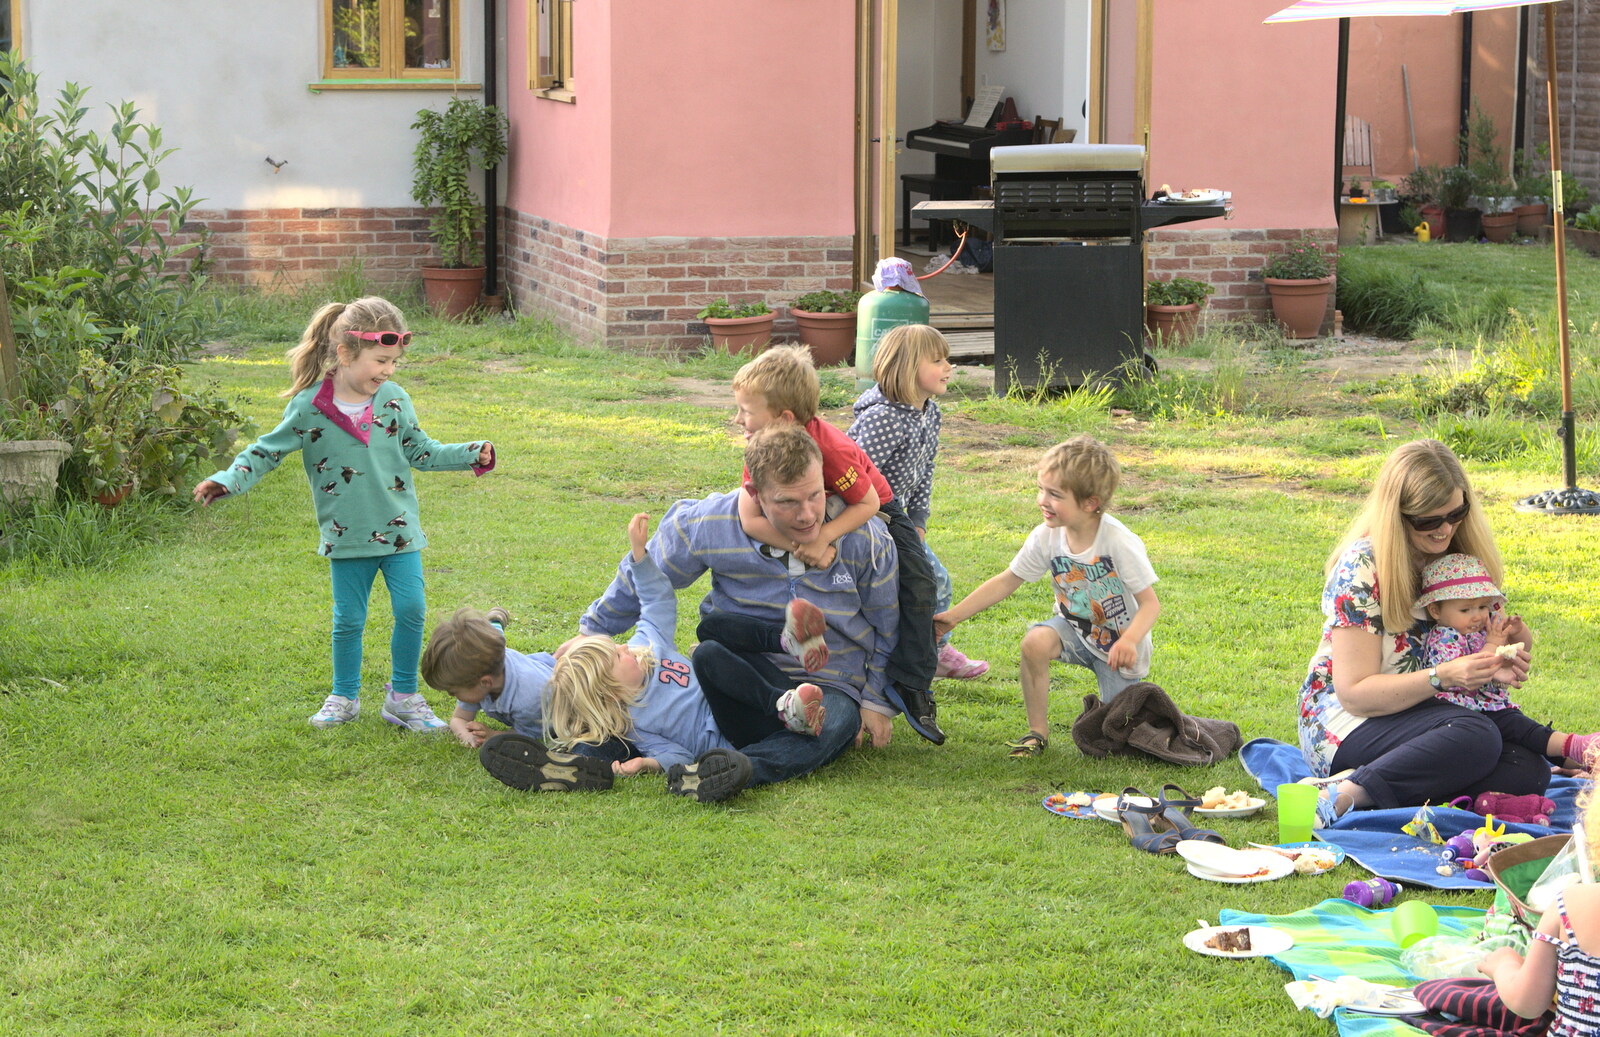 Mike busts out of the sprog pile from A "Not a Birthday Party" Barbeque, Brome, Suffolk - 25th May 2014